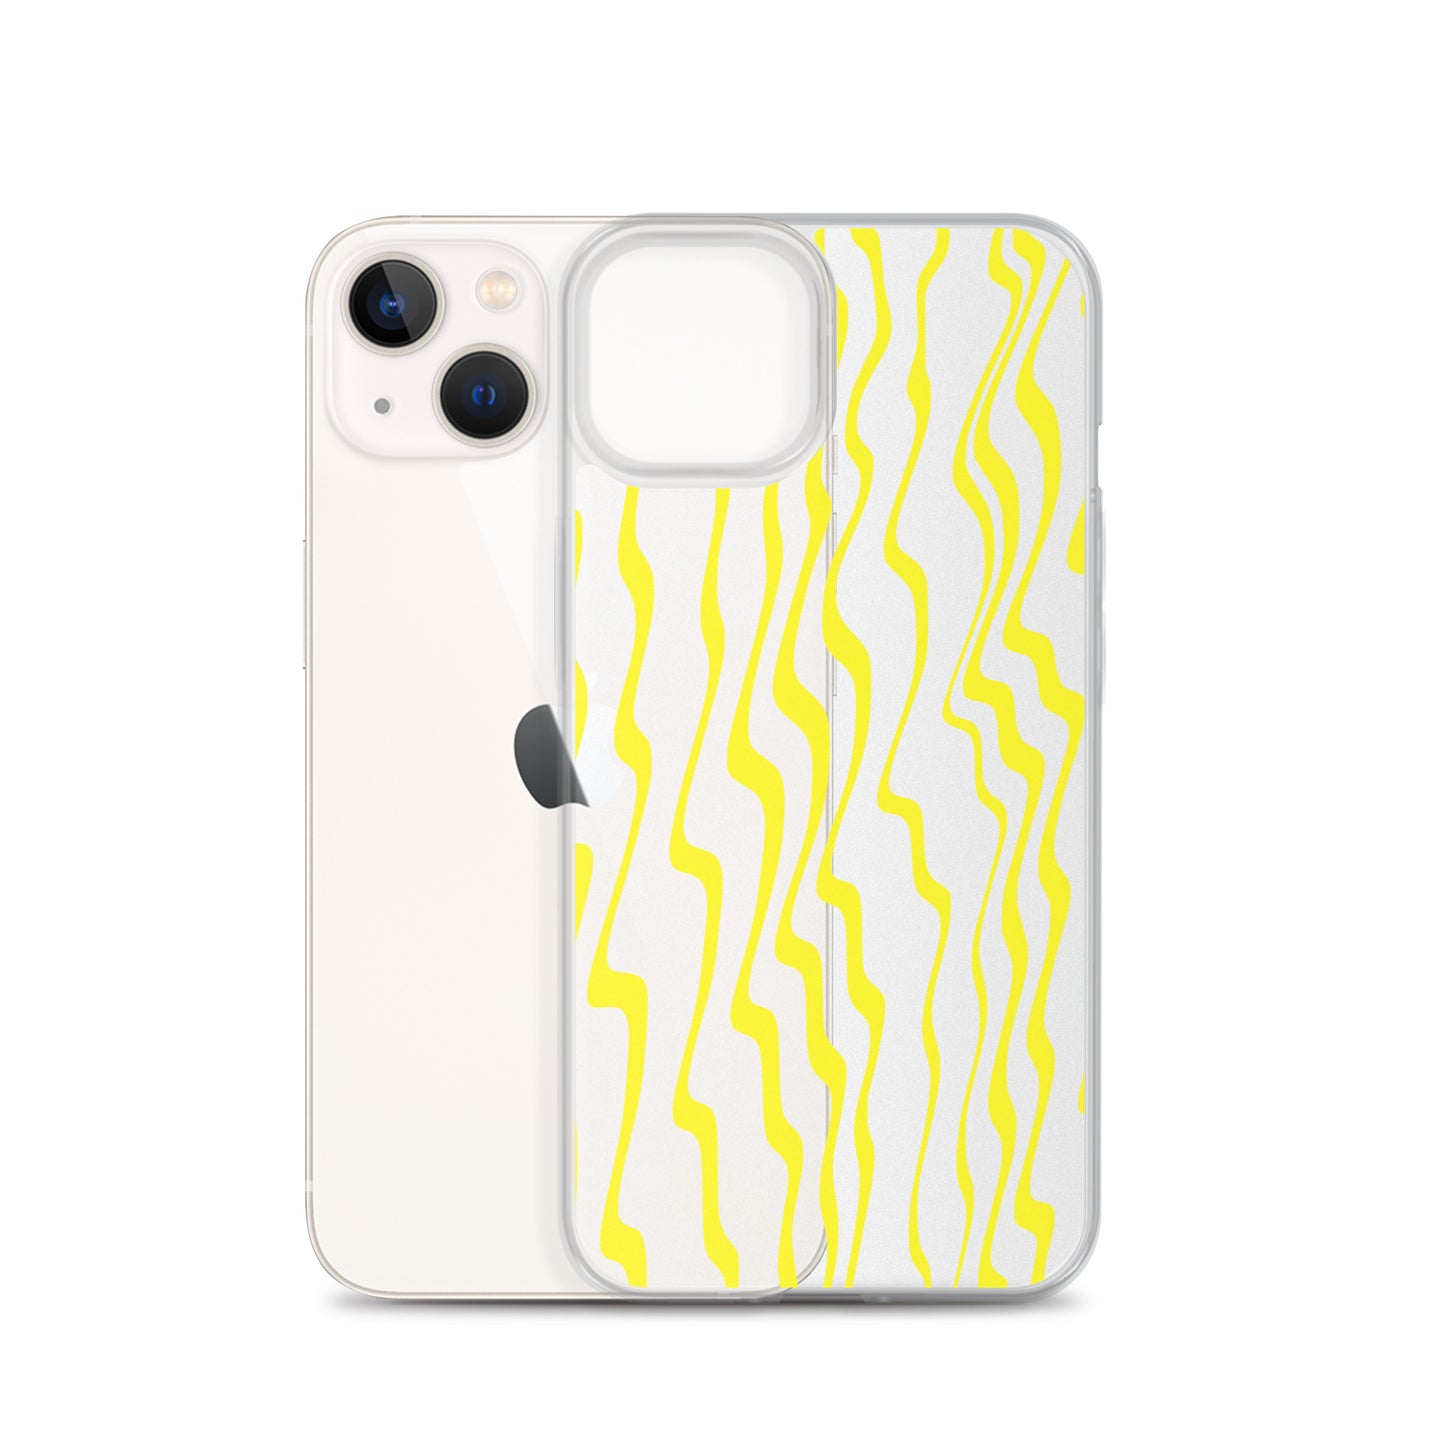 Yellow Melted Striped Pattern iPhone Case